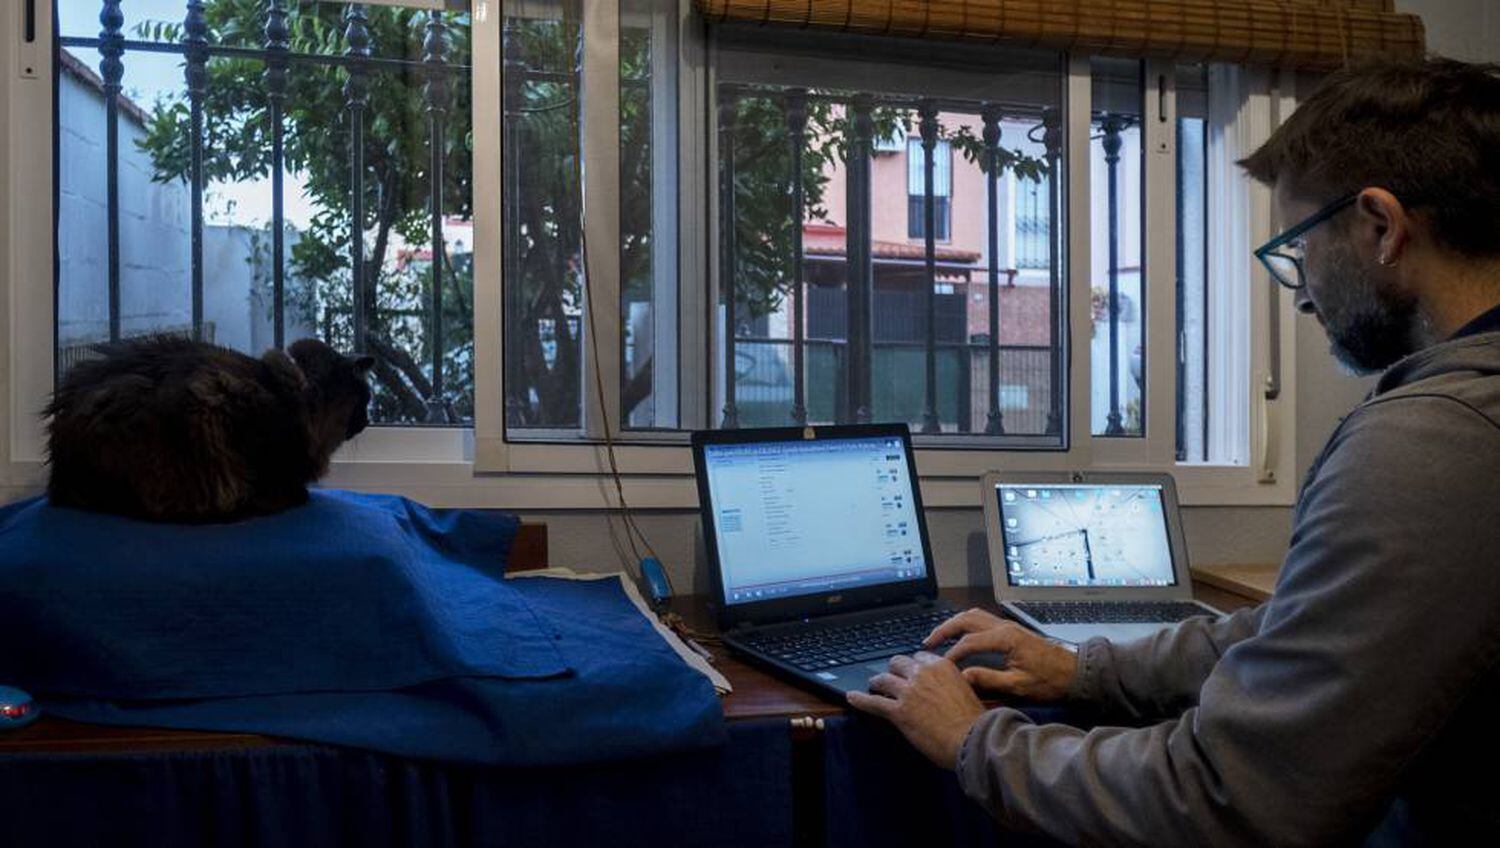 A man works from home during the coronavirus lockdown in Spain.